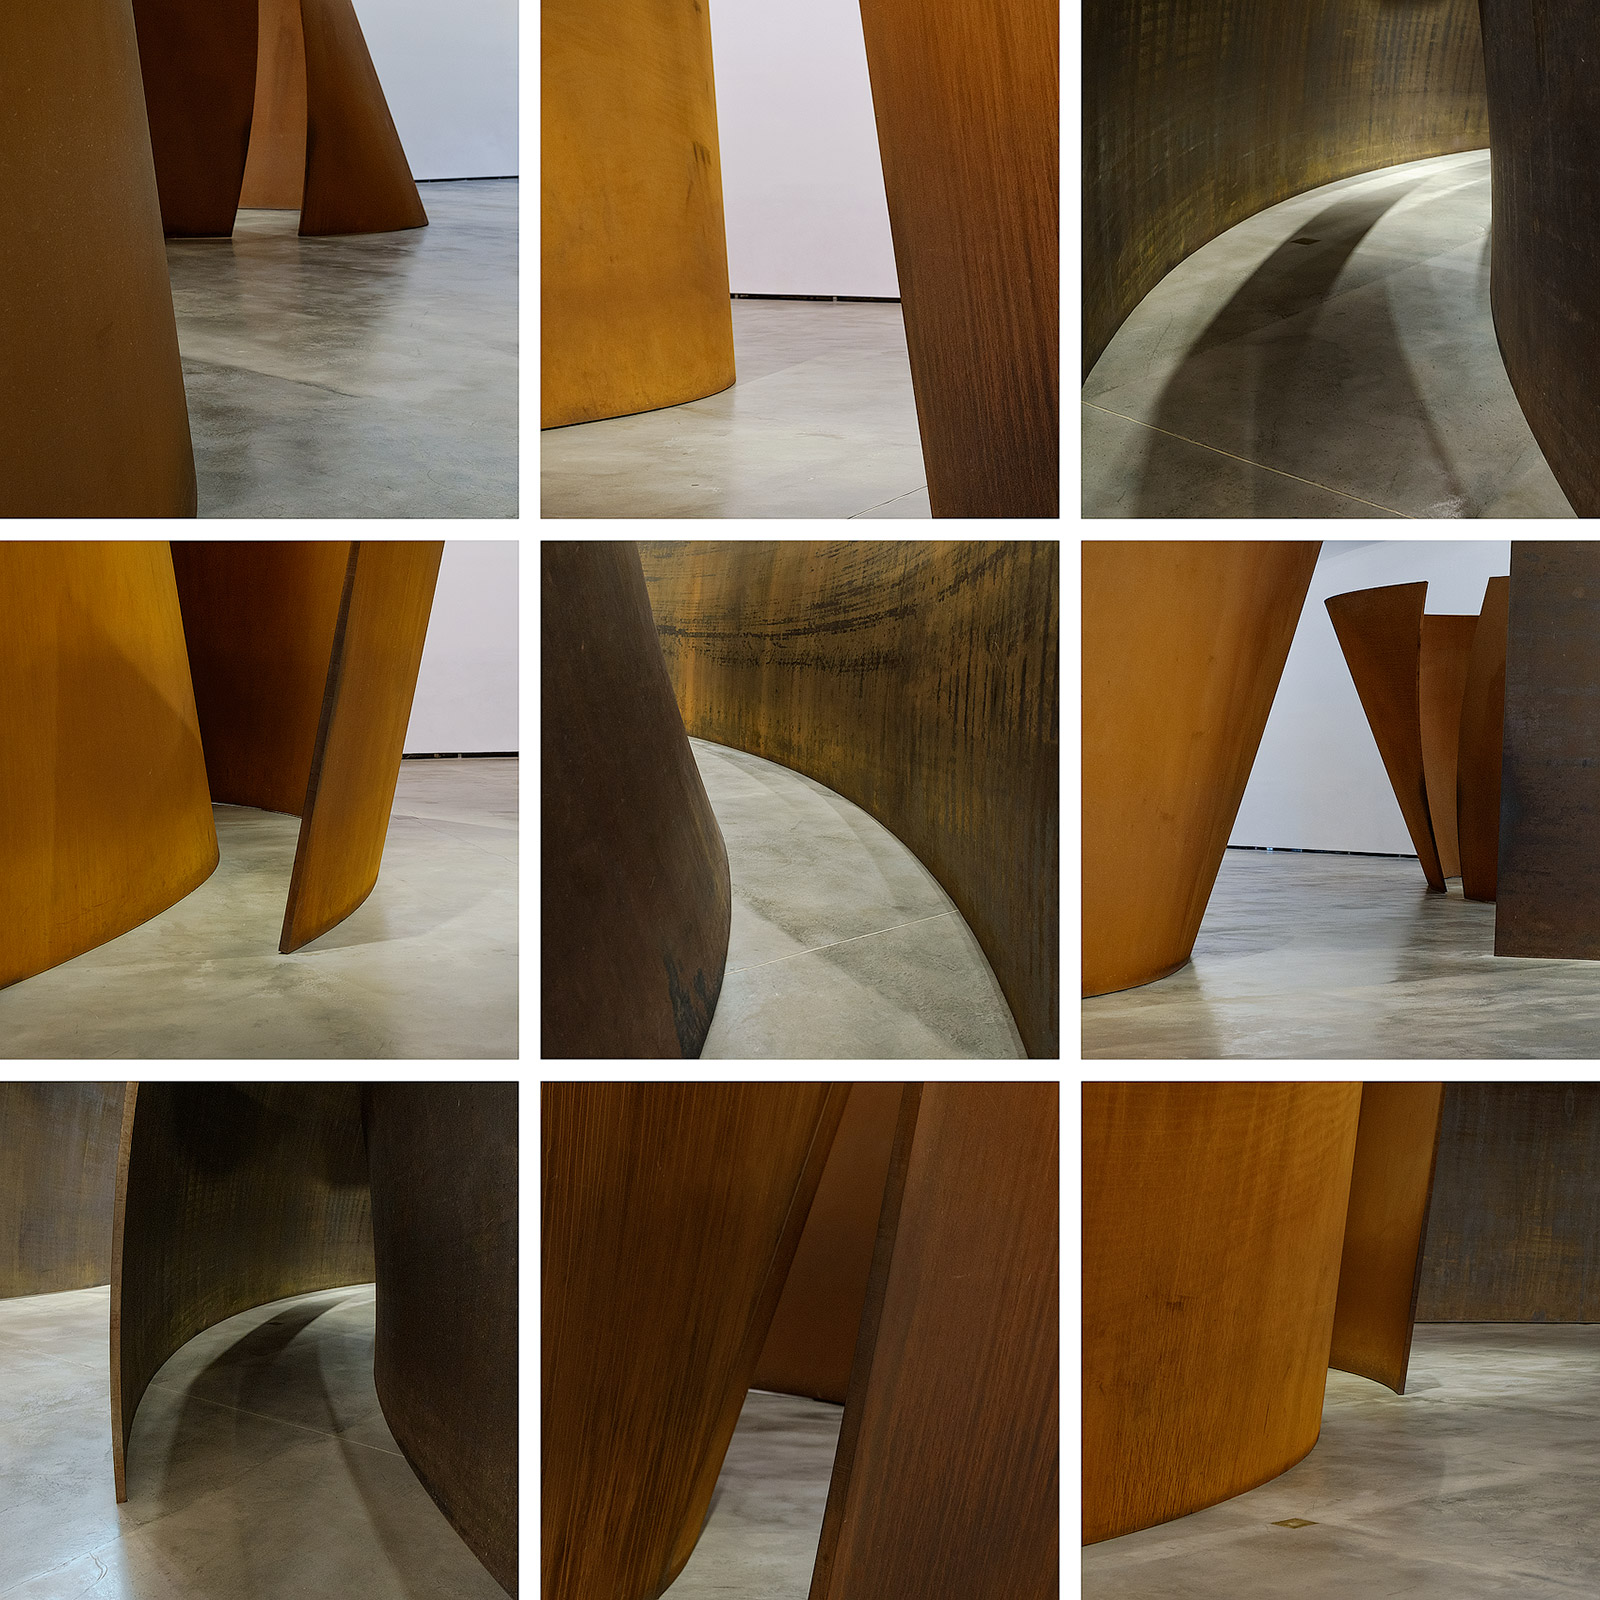 The Matter of Time: sculptures by Richard Serra - Fuji X-E1 and 18-55mm lens